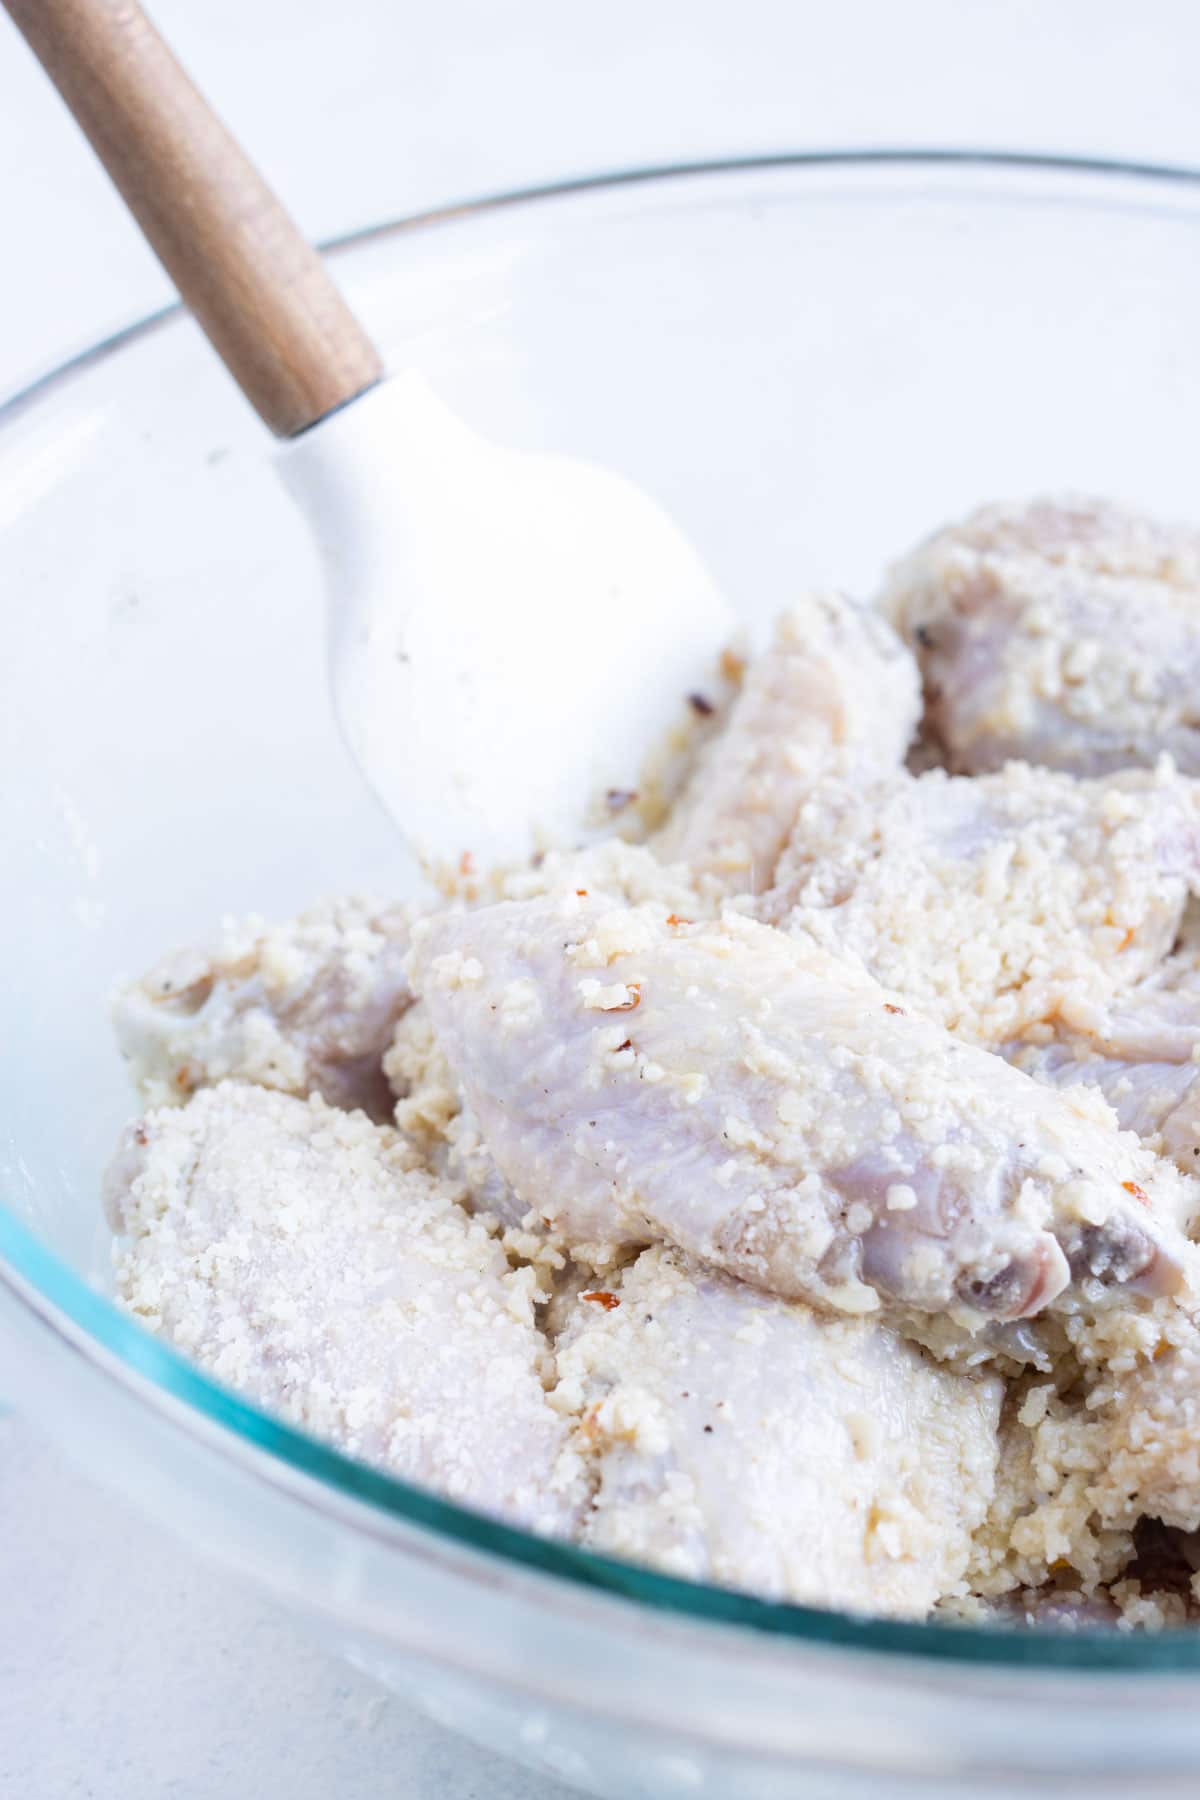 Wings are coated completely in cornstarch and parmesan.